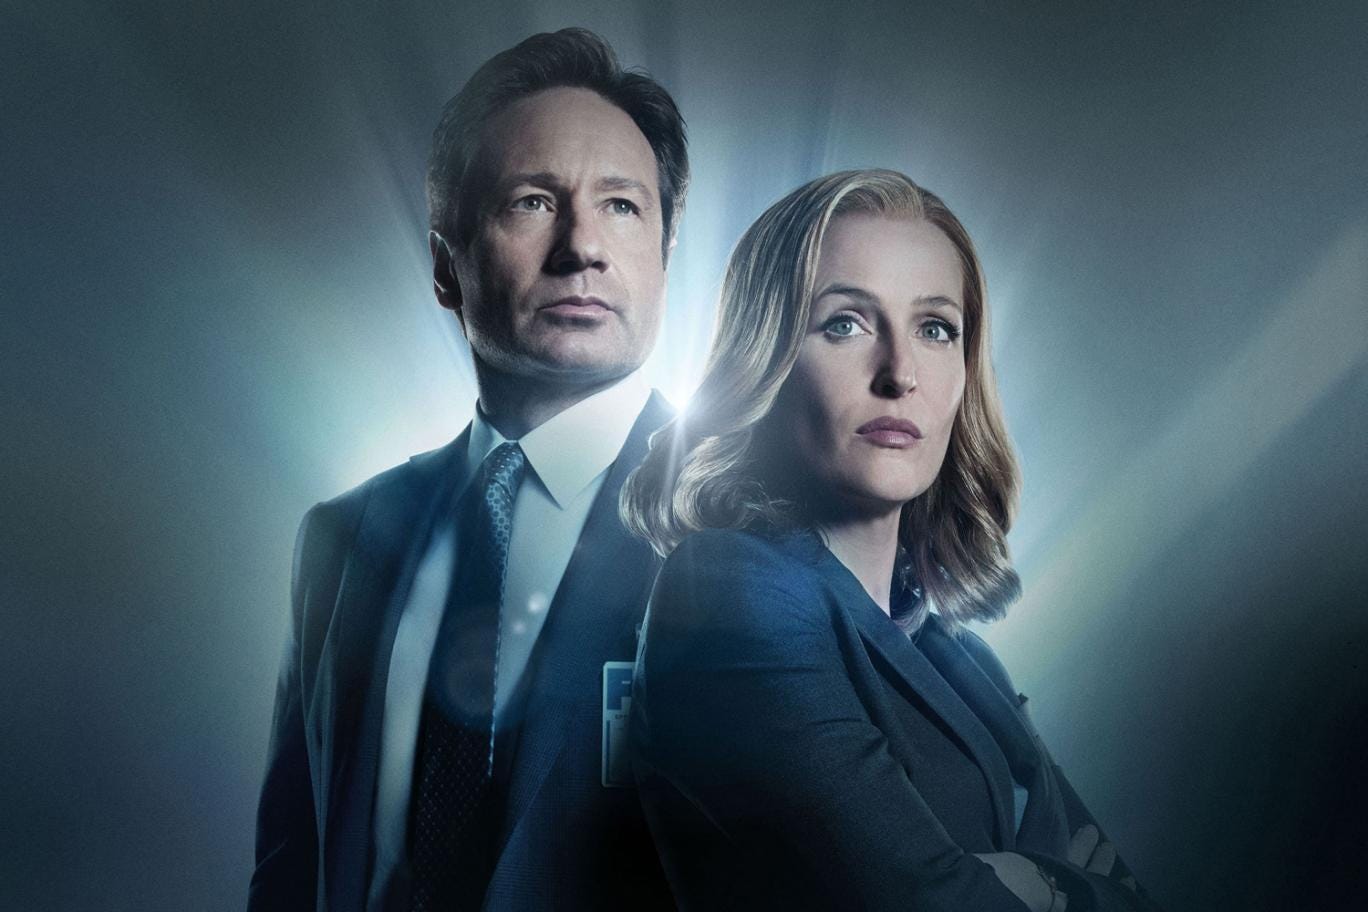 http://static.independent.co.uk/s3fs-public/styles/story_large/public/thumbnails/image/2015/12/11/13/x-files-2016.jpg